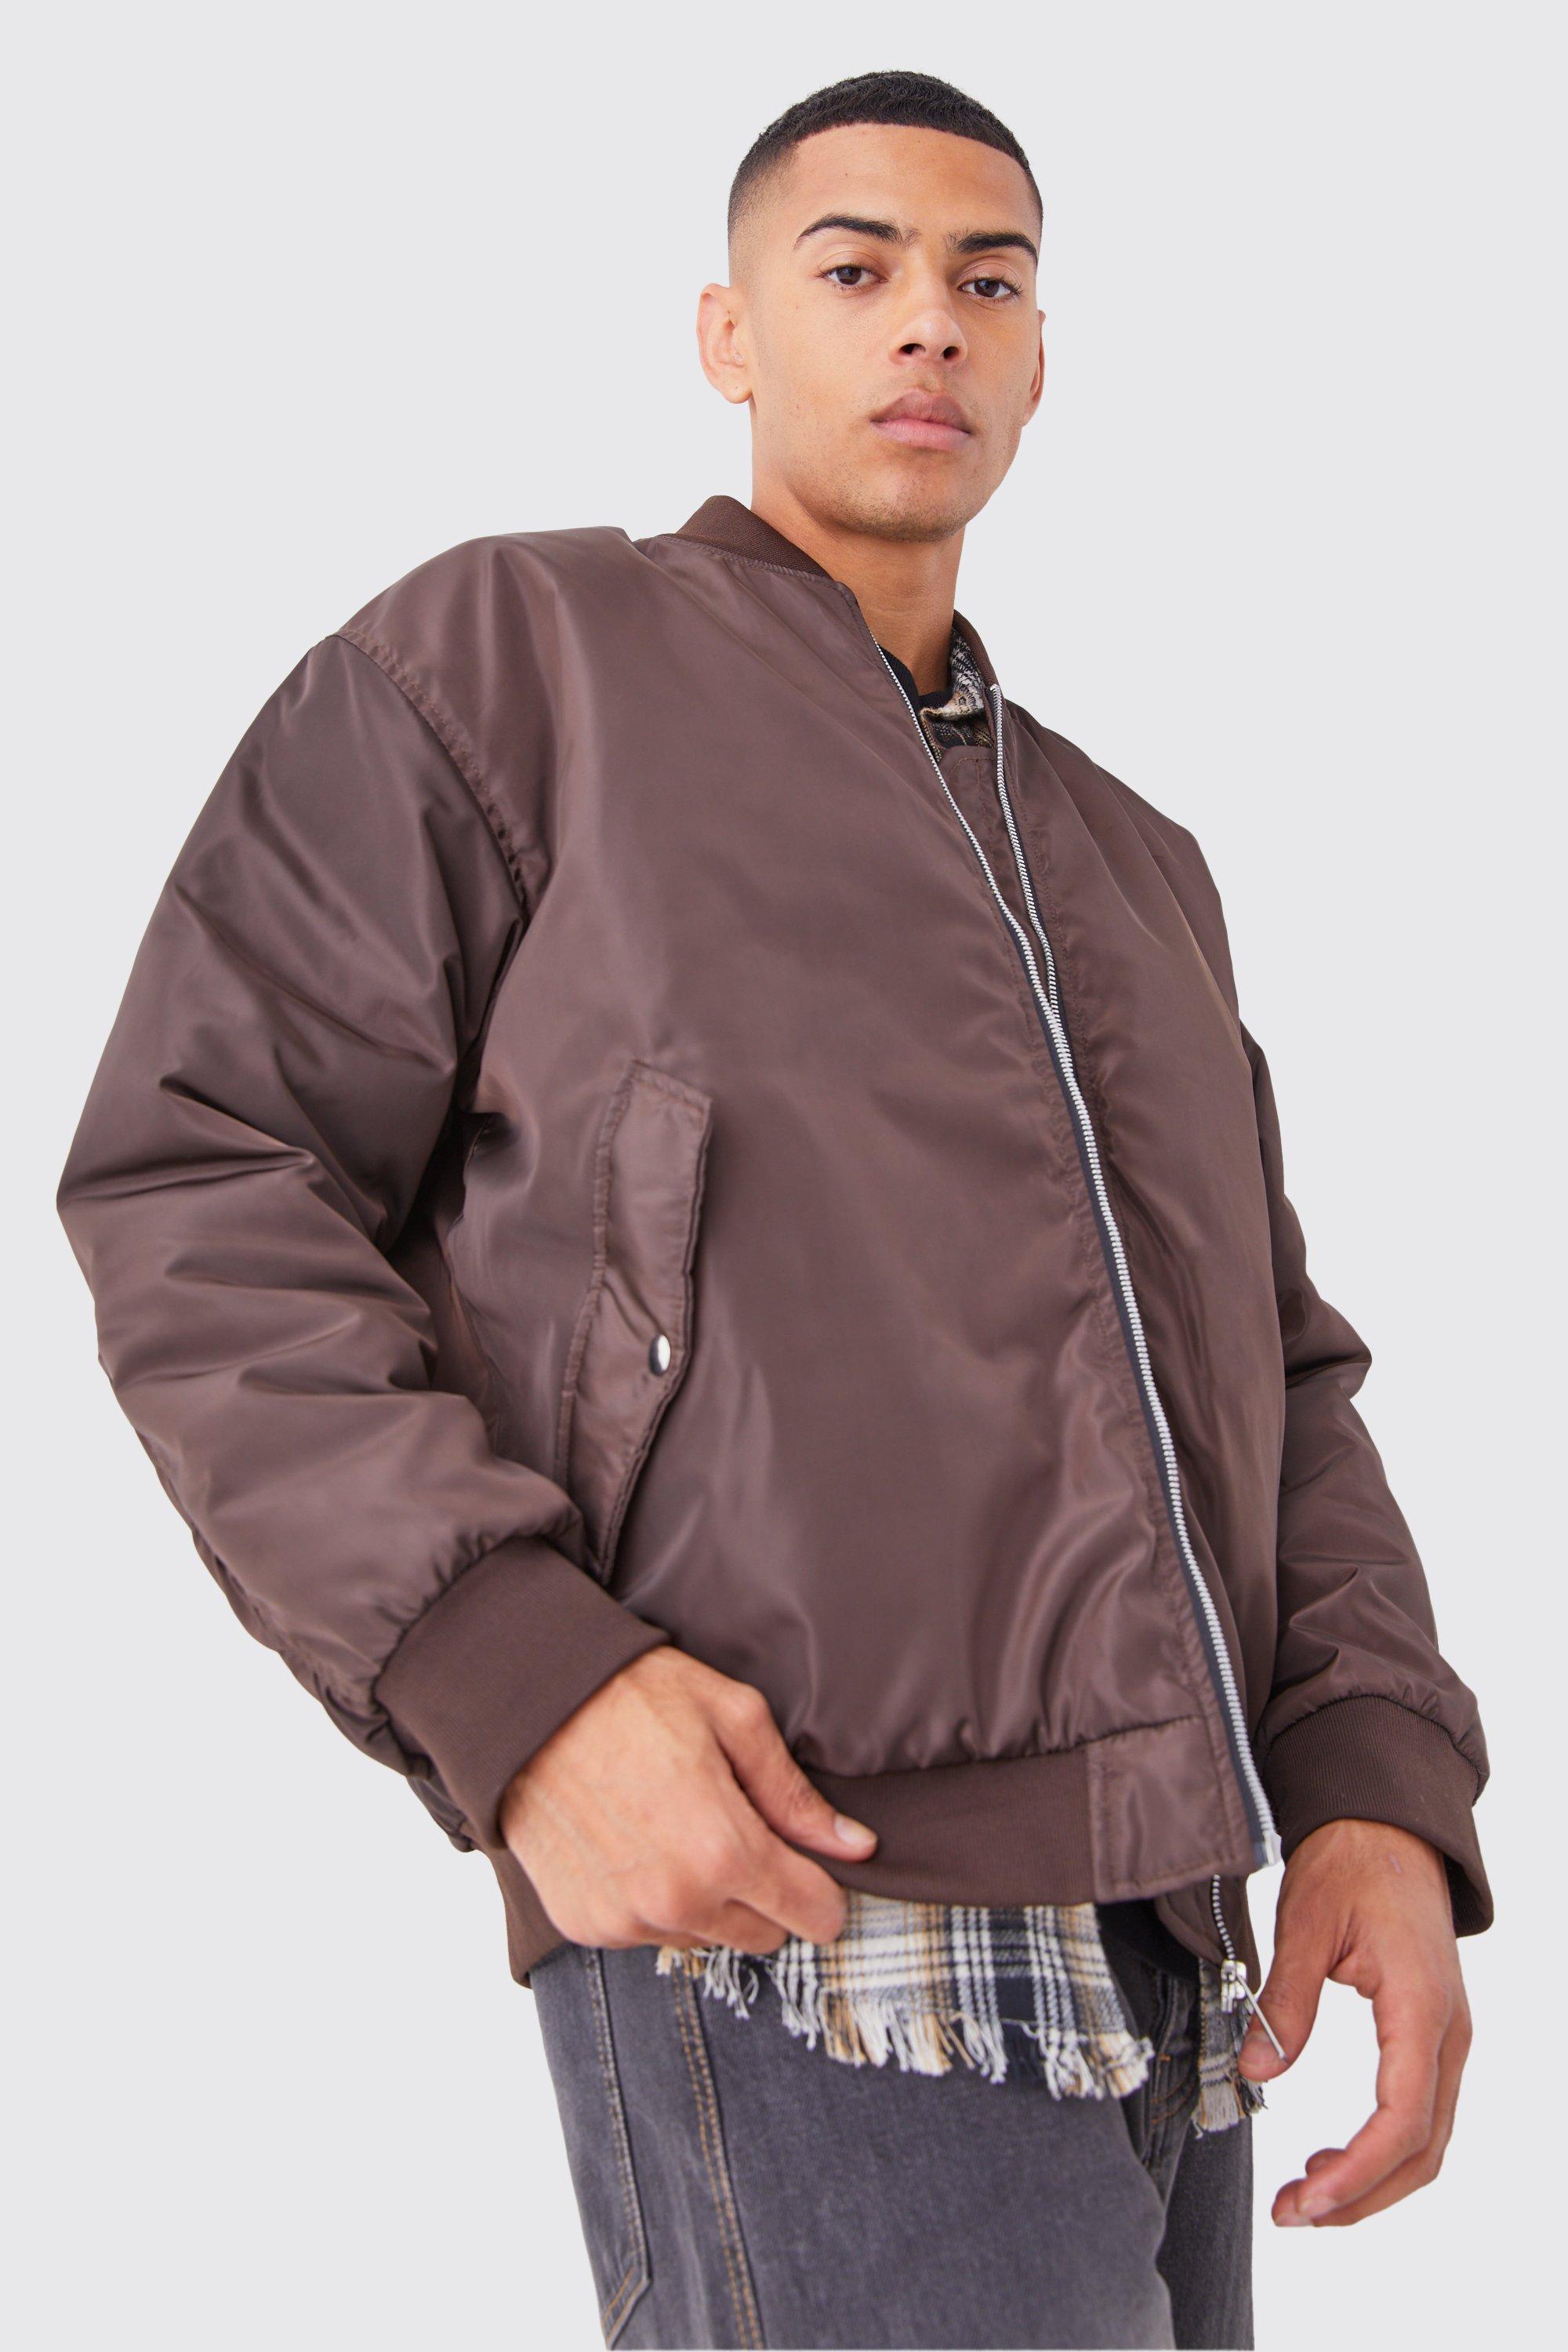 Image of Giacca Bomber oversize in nylon con ruches sulle maniche, Brown